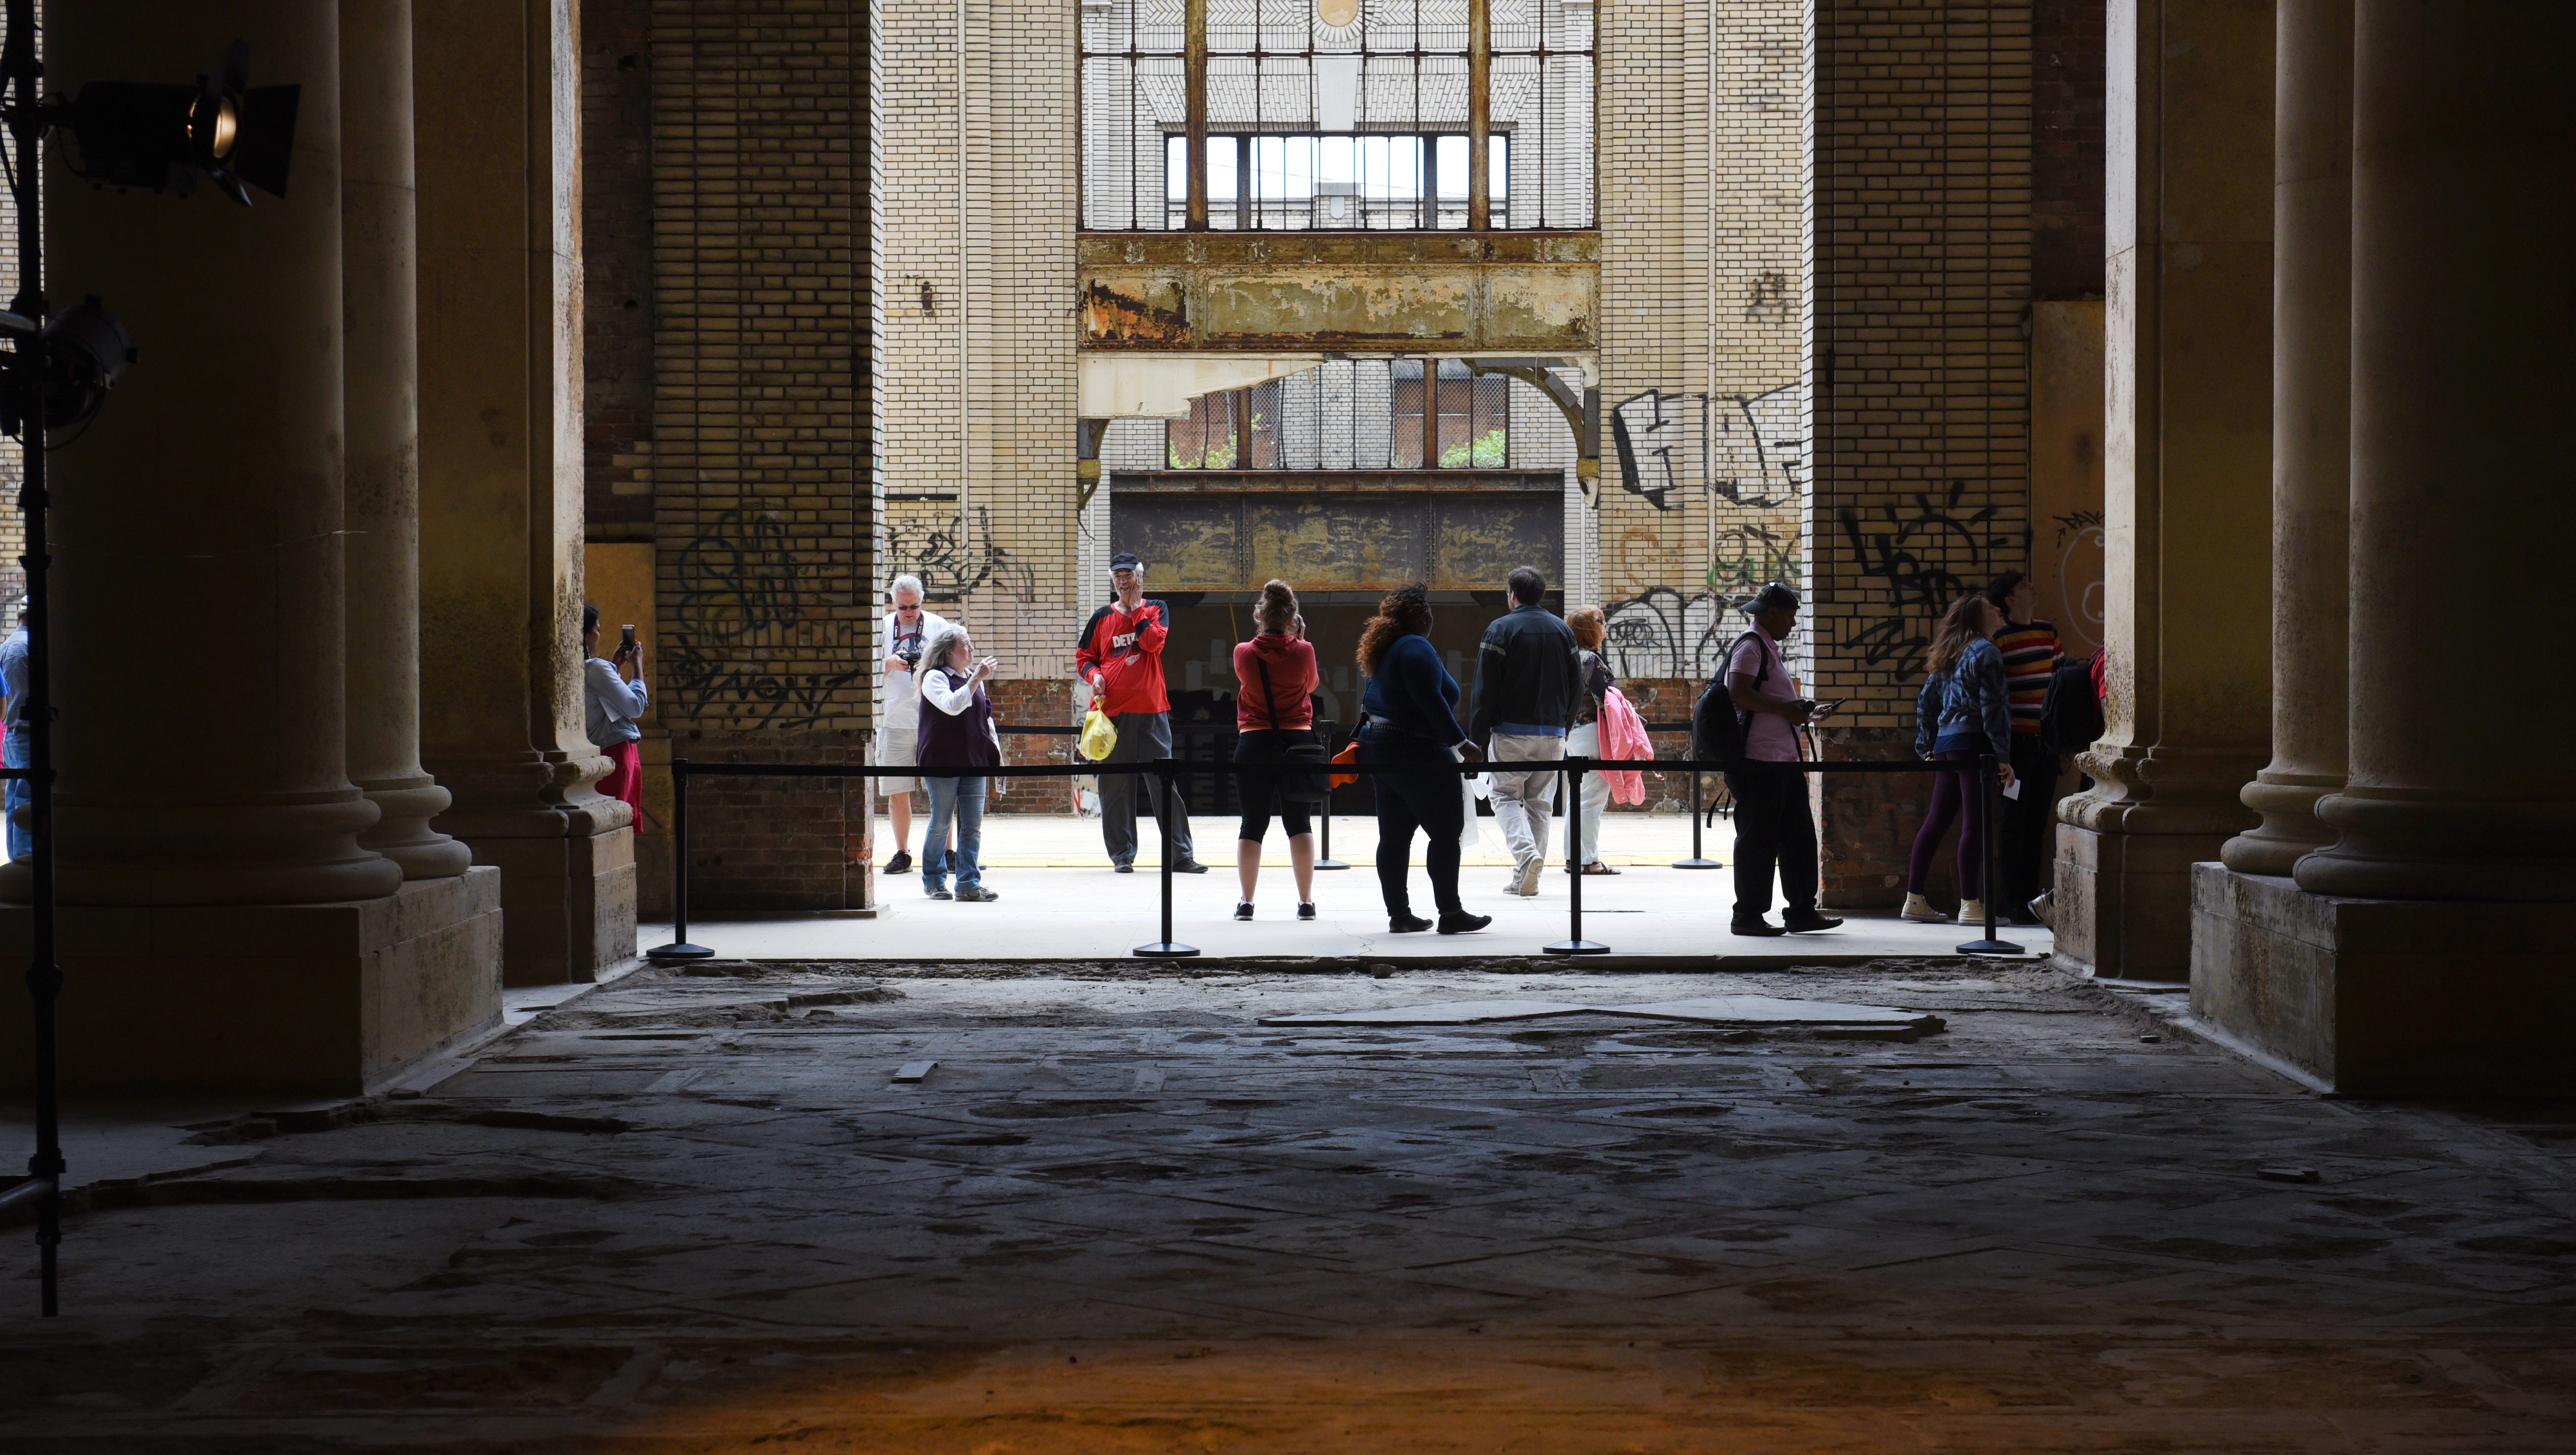 People enter the Michigan Central Train Depot during an open house on Friday in Detroit.